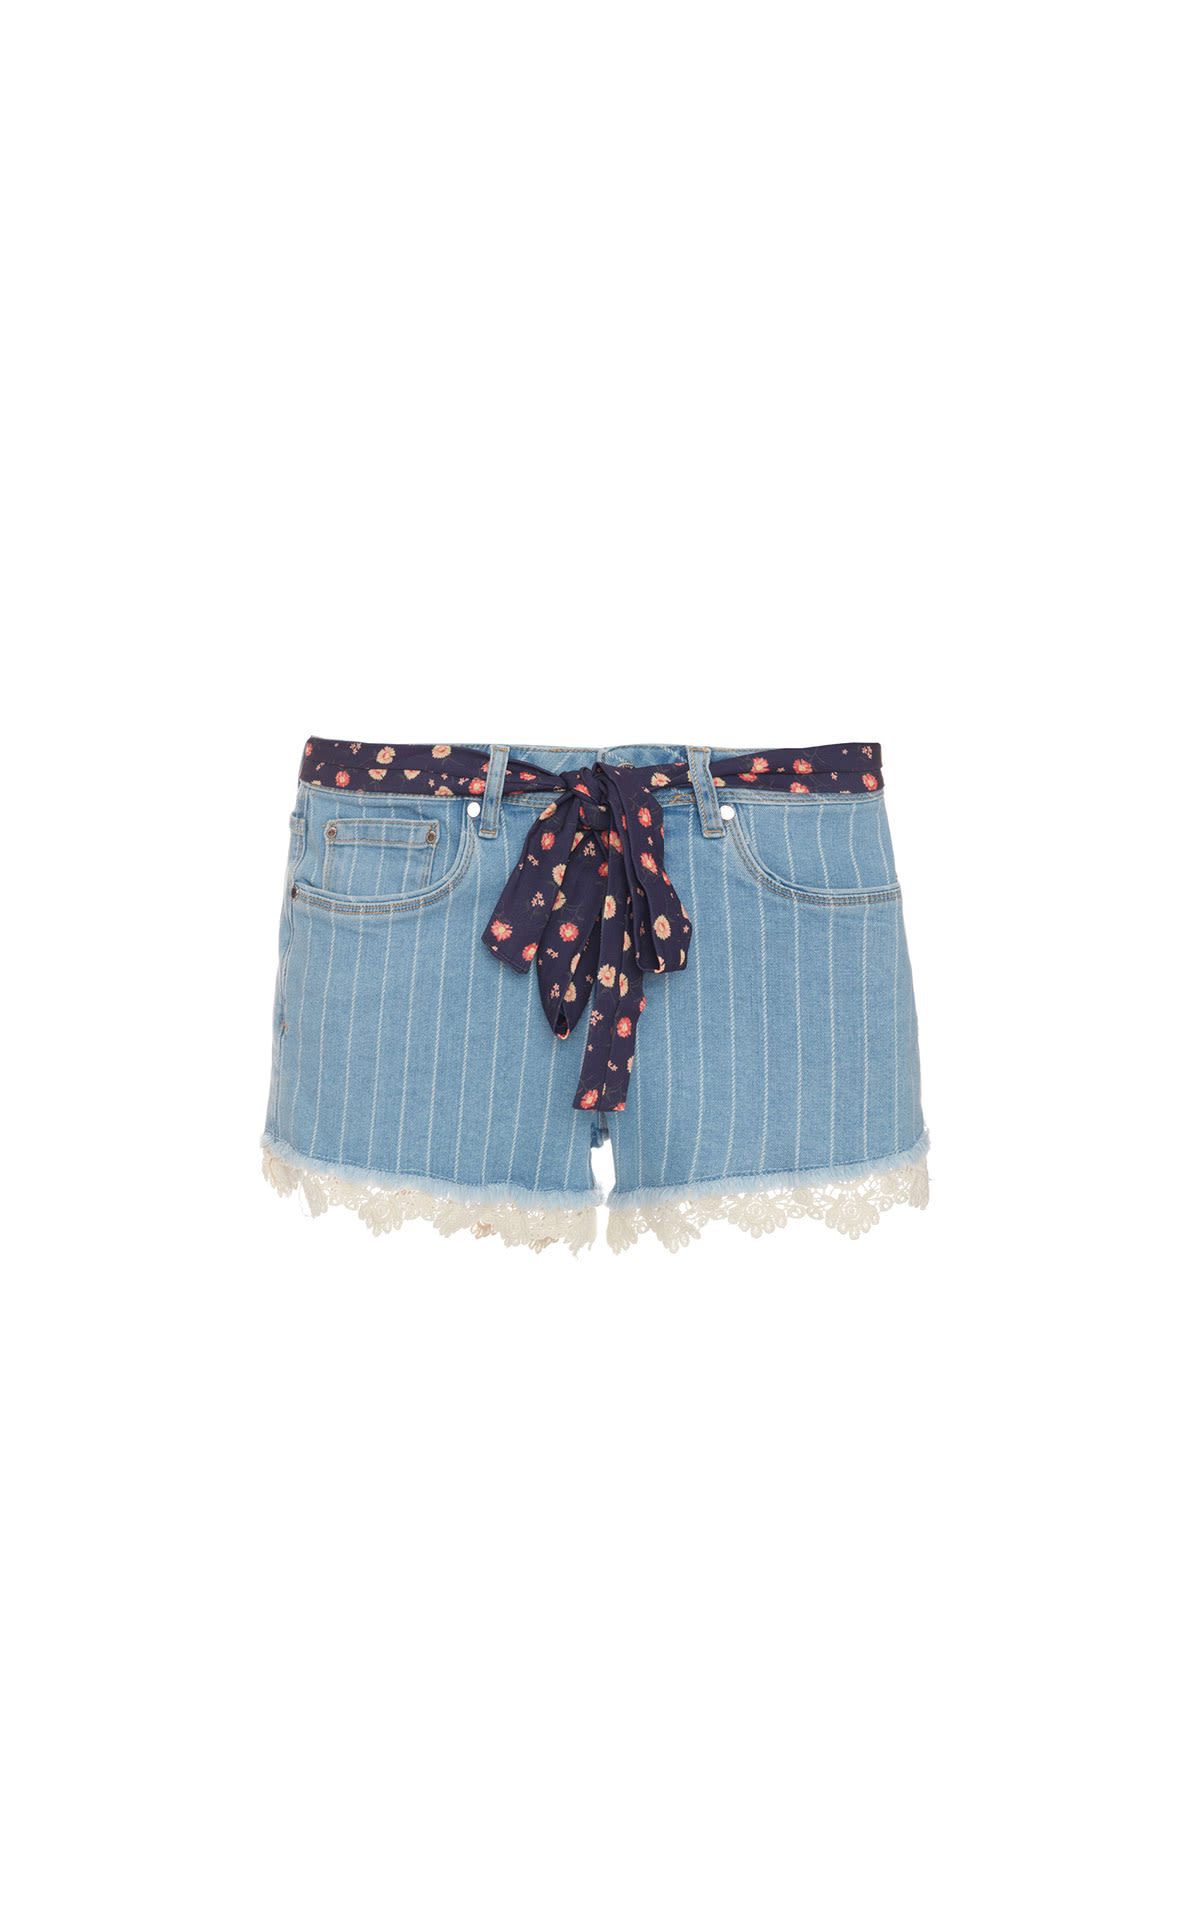 Superdry Lace hot shorts from Bicester Village